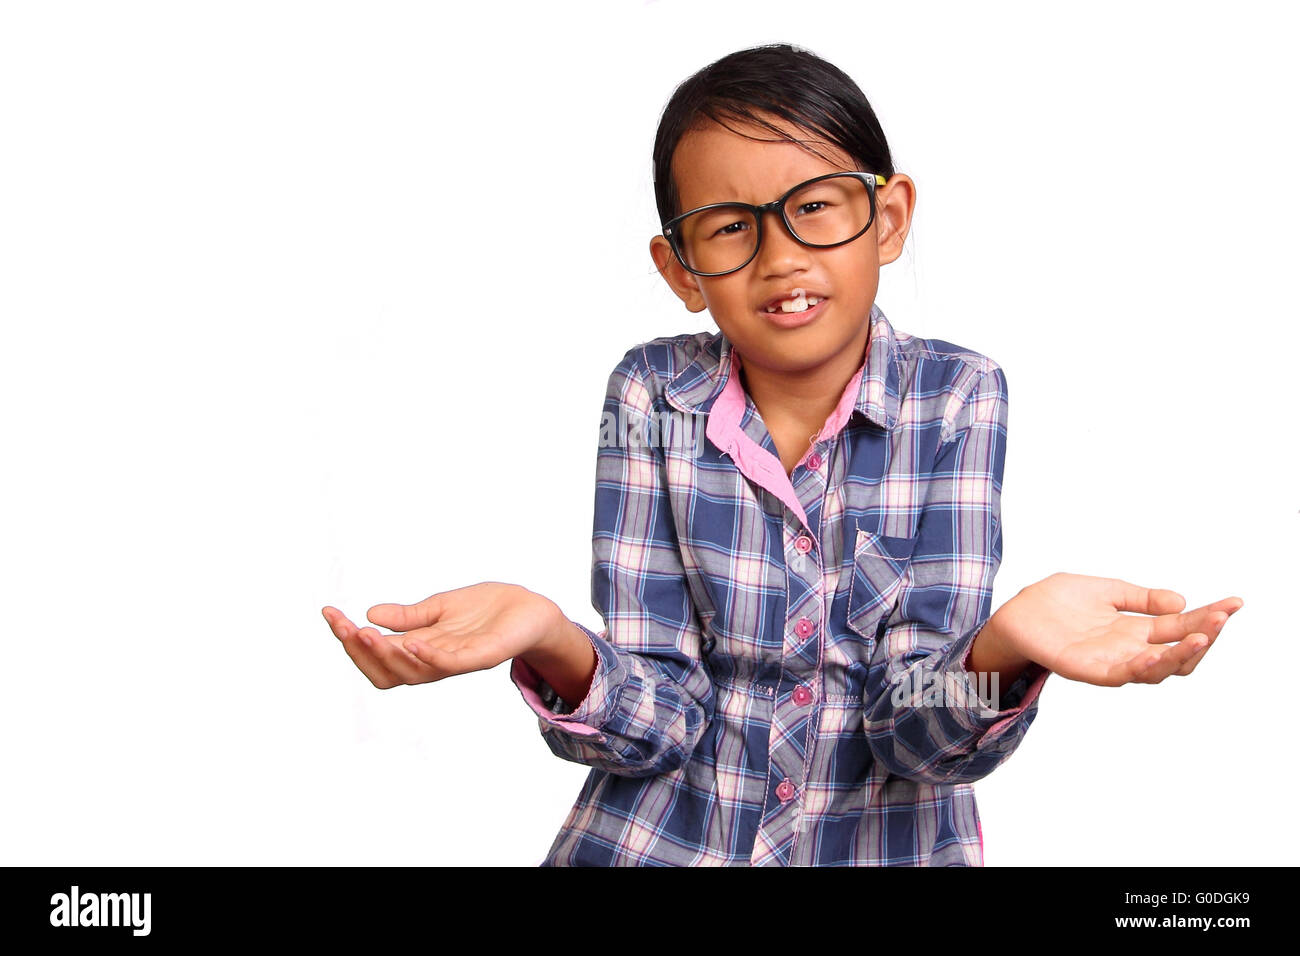 Little girl with glasses performing shrug or I don't know gesture isolated on white Stock Photo